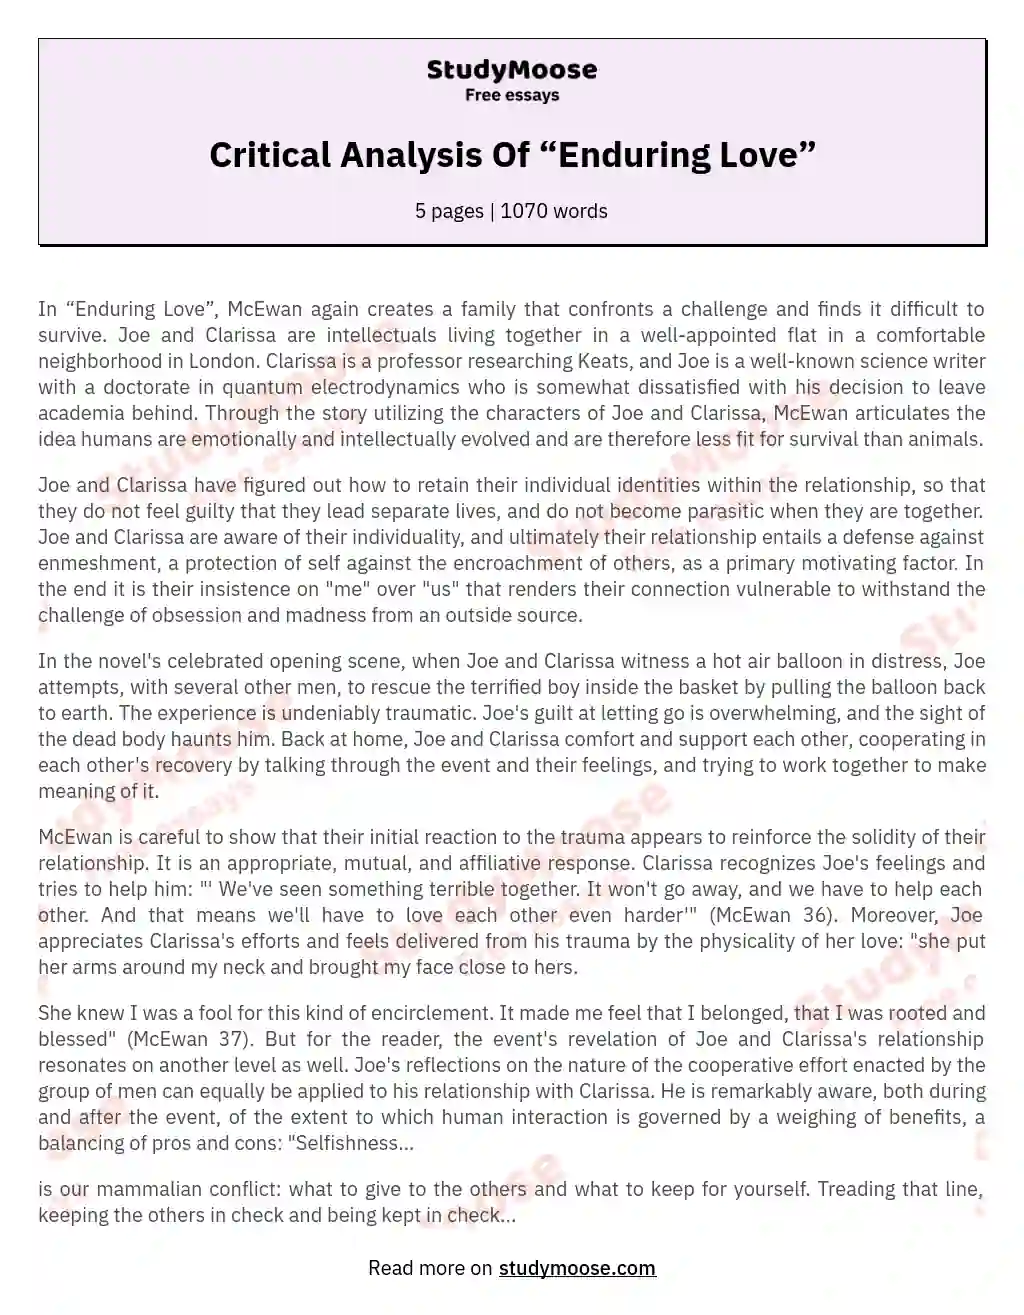 Critical Analysis Of “Enduring Love”